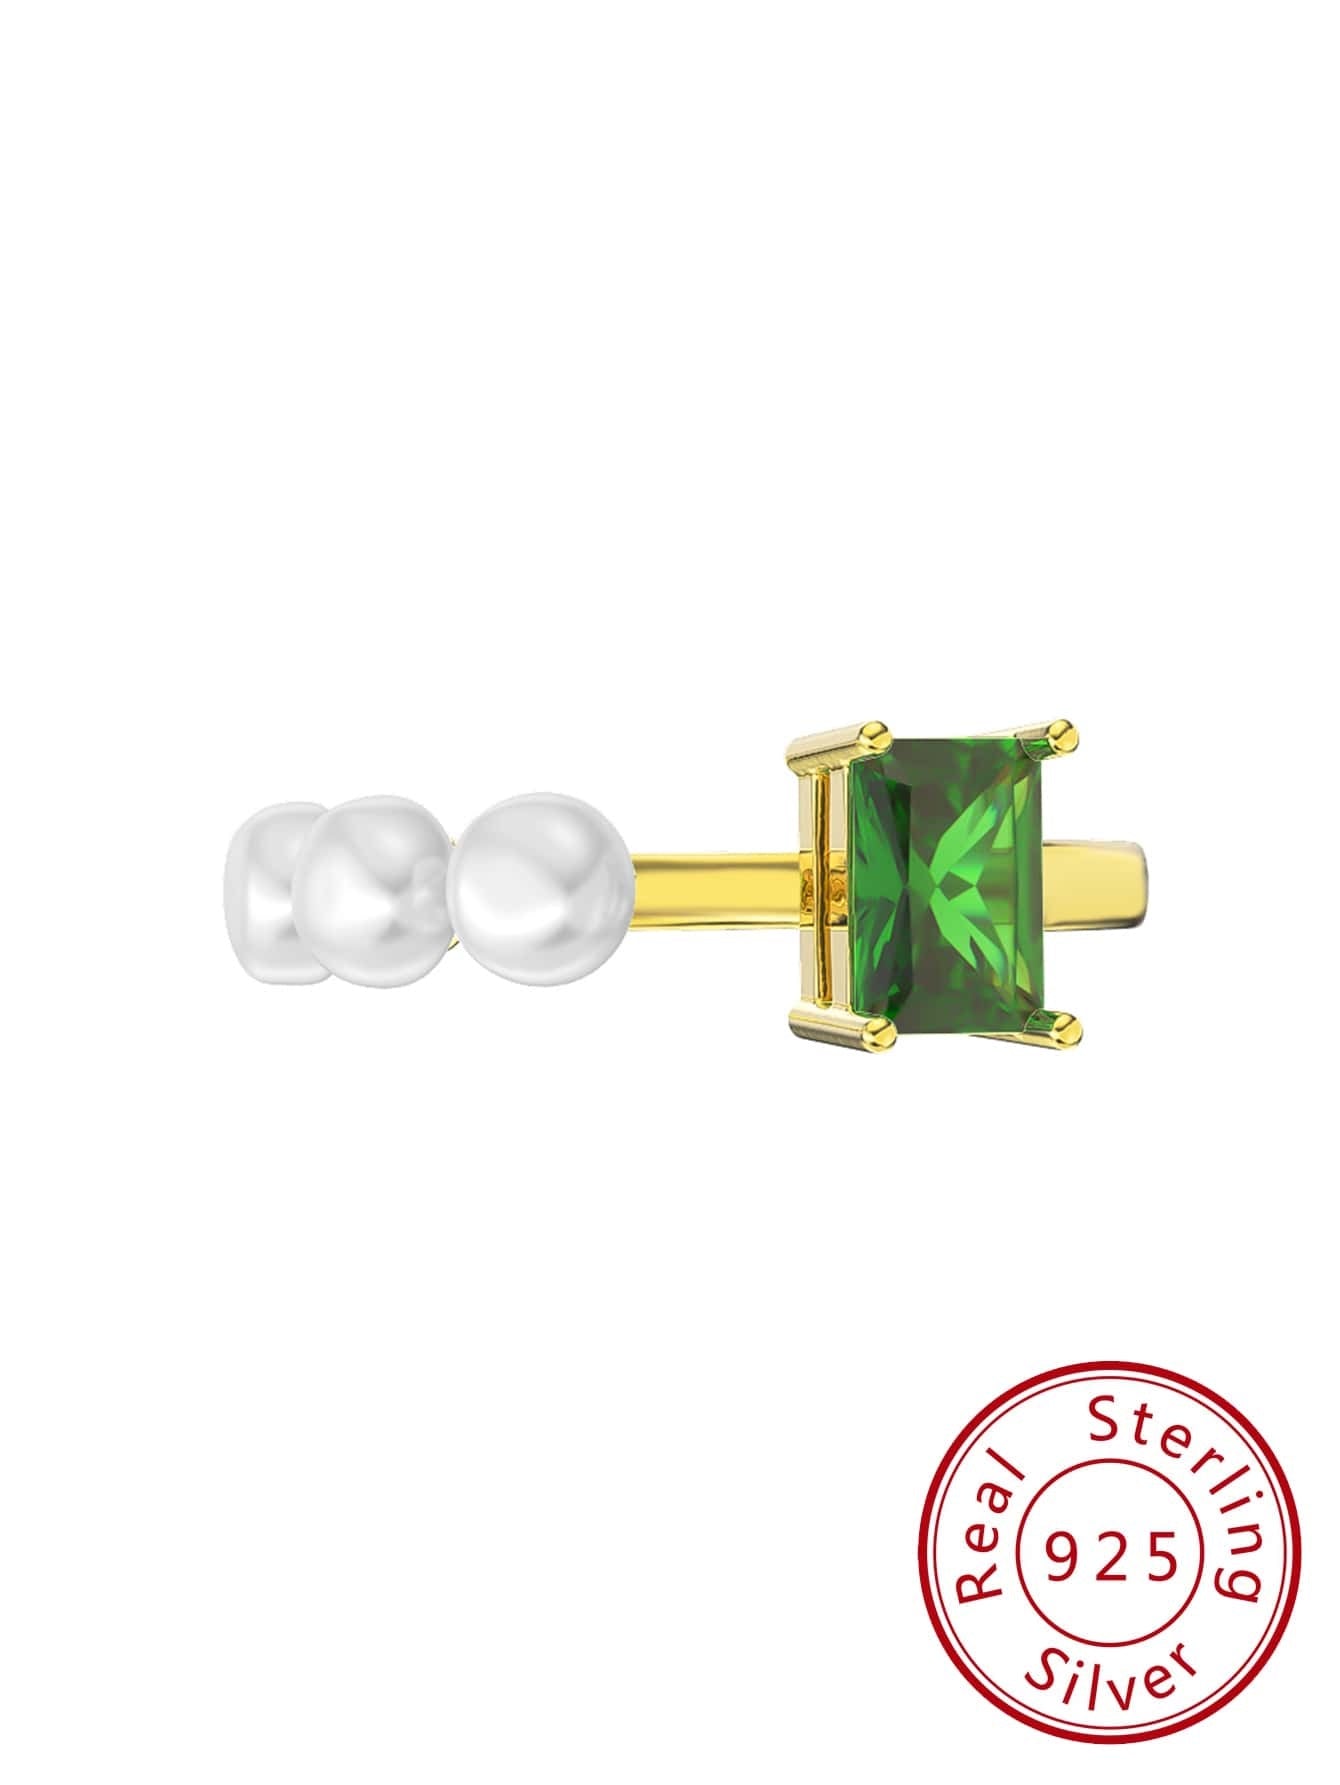 CM-AR853744 925 Sterling Silver Cultured Freshwater Pearls Green Cubic Zirconia Adjustable Ring